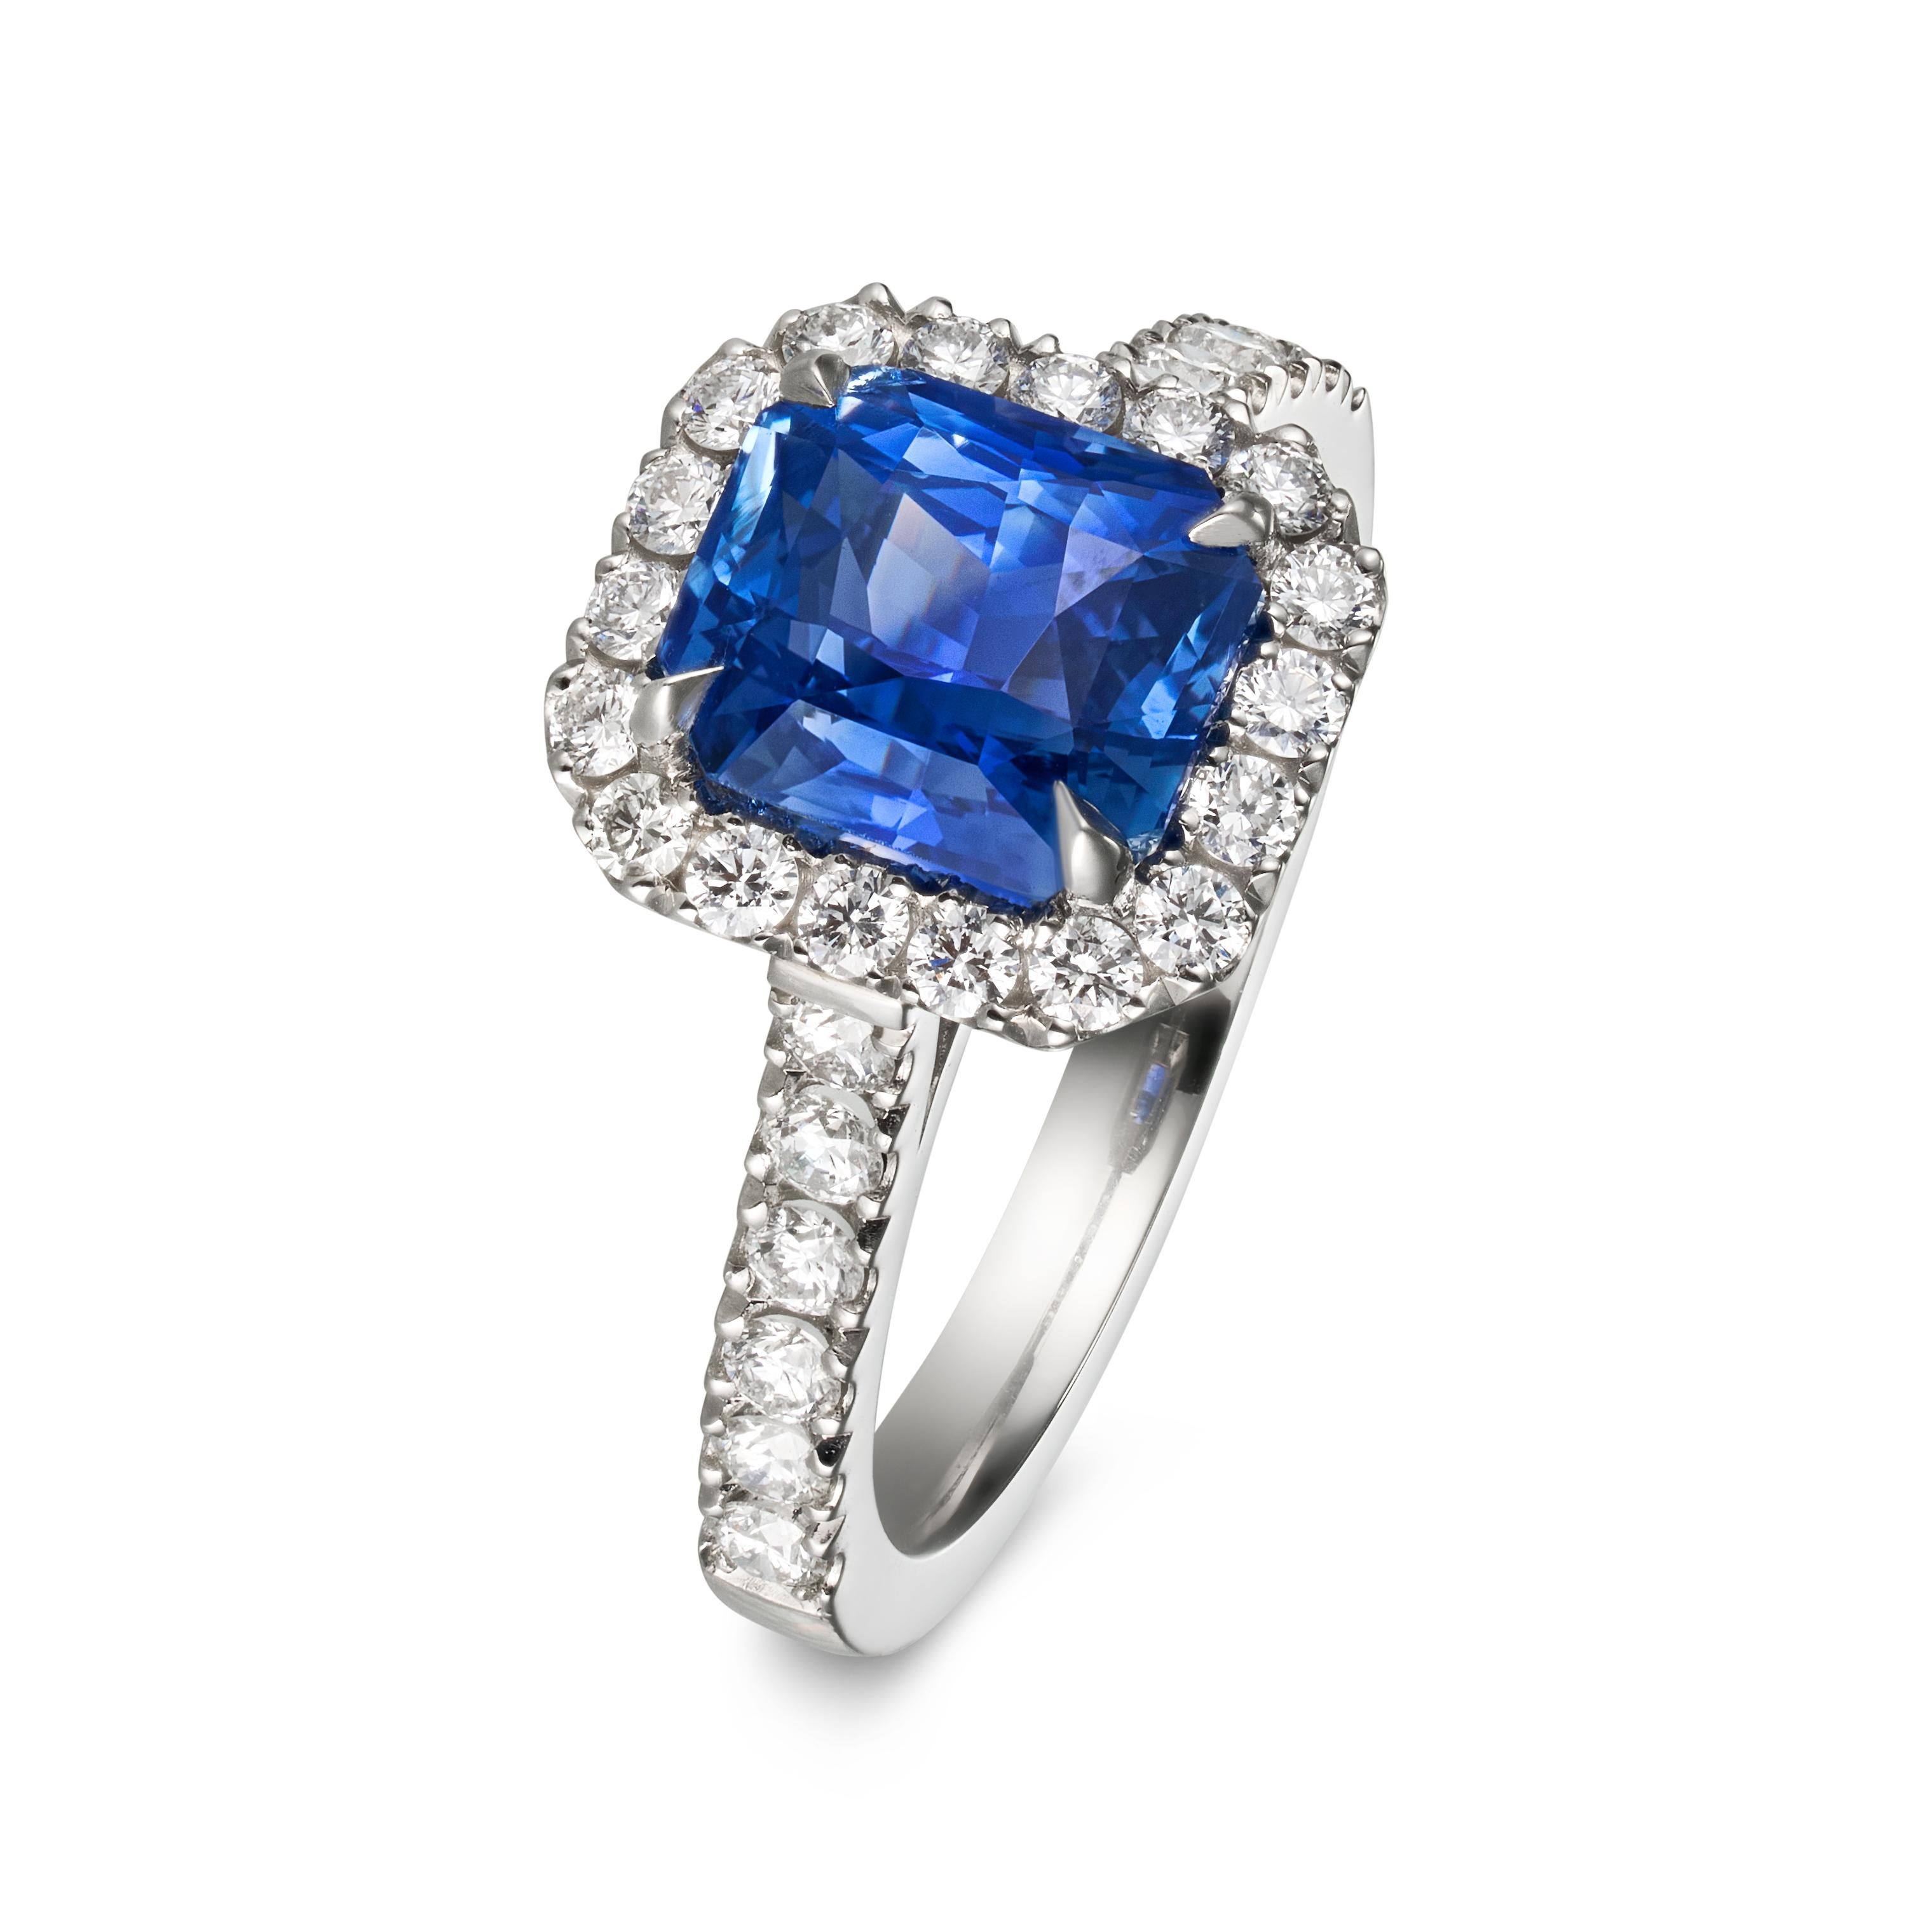 Gemstone: natural untreated, Ceylon Blue Sapphire
Colour: Cornflower blue
Weight of Sapphire : 3 carats 
Conflict free diamonds. Weight of diamonds: 0.68 carats
Metal: Platinum
Certificate: French Gem Lab (FGL) 

The purchase of this rare ring will